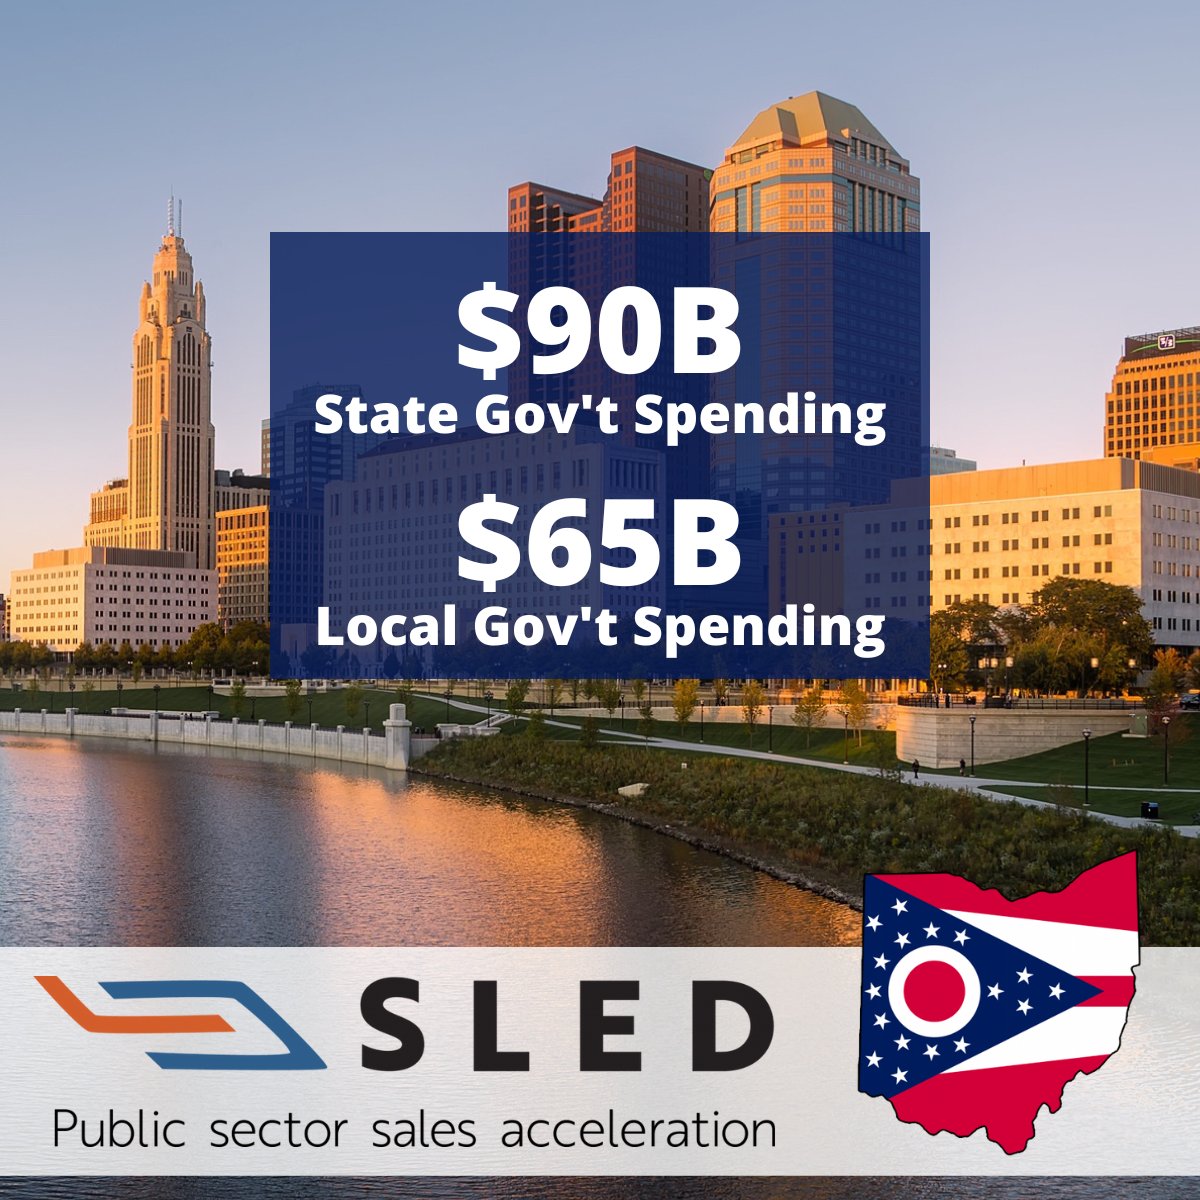 Holy Toledo! State, local, and city governments in #Ohio spend $155 billion annually. 🎢

Learn more about government contracts in Ohio->
selltosled.com/government-con…

 #b2g #govcon #governmentcontracts